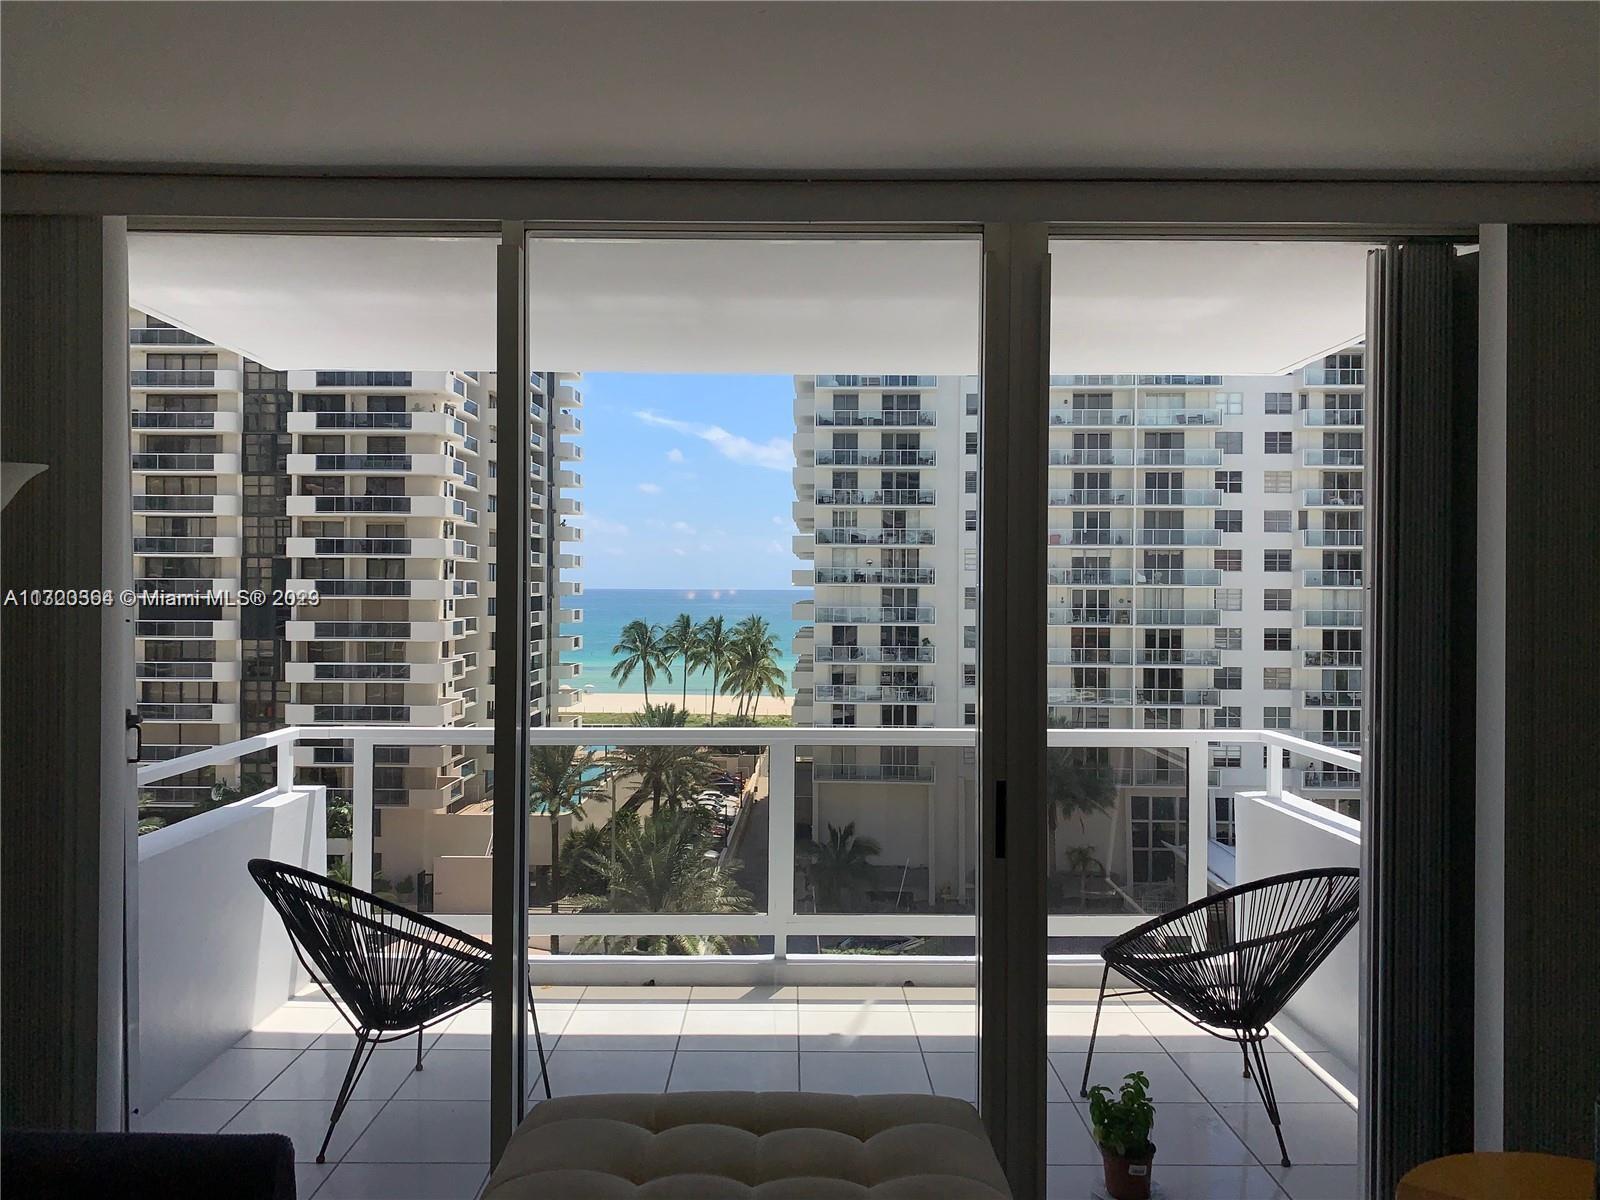 Amazing 2 bedrooms 2 bath unit facing East with a split floor plan. This Miami Beach building has be